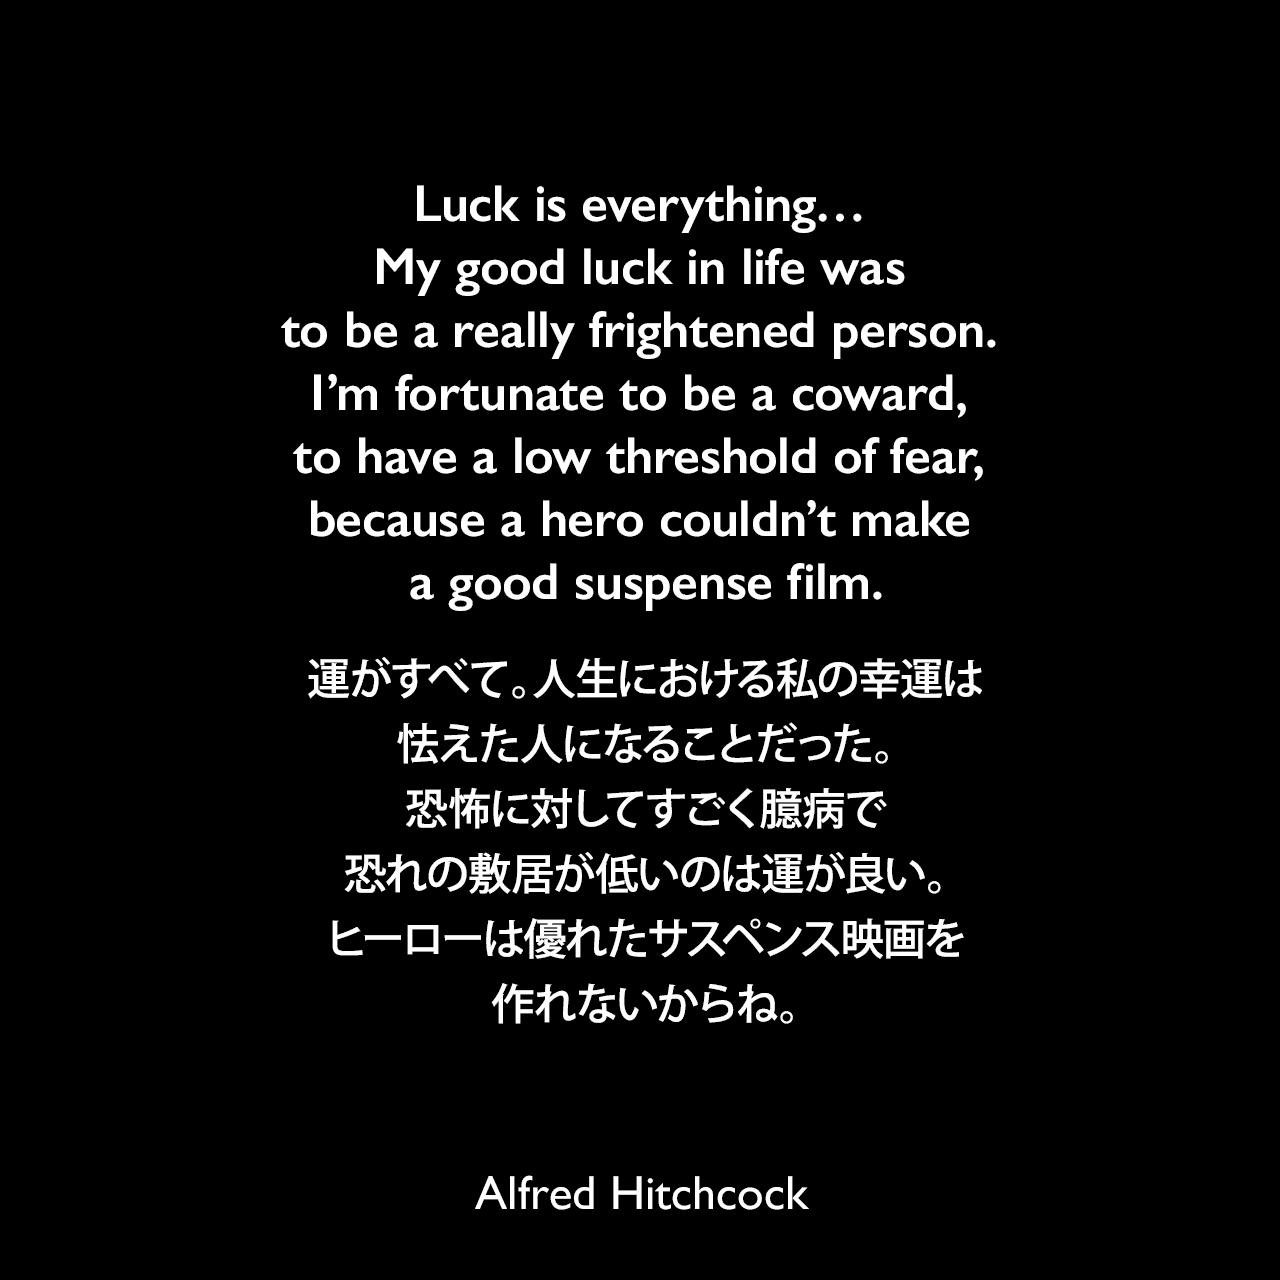 Luck is everything… My good luck in life was to be a really frightened person. I’m fortunate to be a coward, to have a low threshold of fear, because a hero couldn’t make a good suspense film.運がすべて。人生における私の幸運は怯えた人になることだった。恐怖に対してすごく臆病で、恐れの敷居が低いのは運が良い。ヒーローは優れたサスペンス映画を作れないからね。Alfred Hitchcock